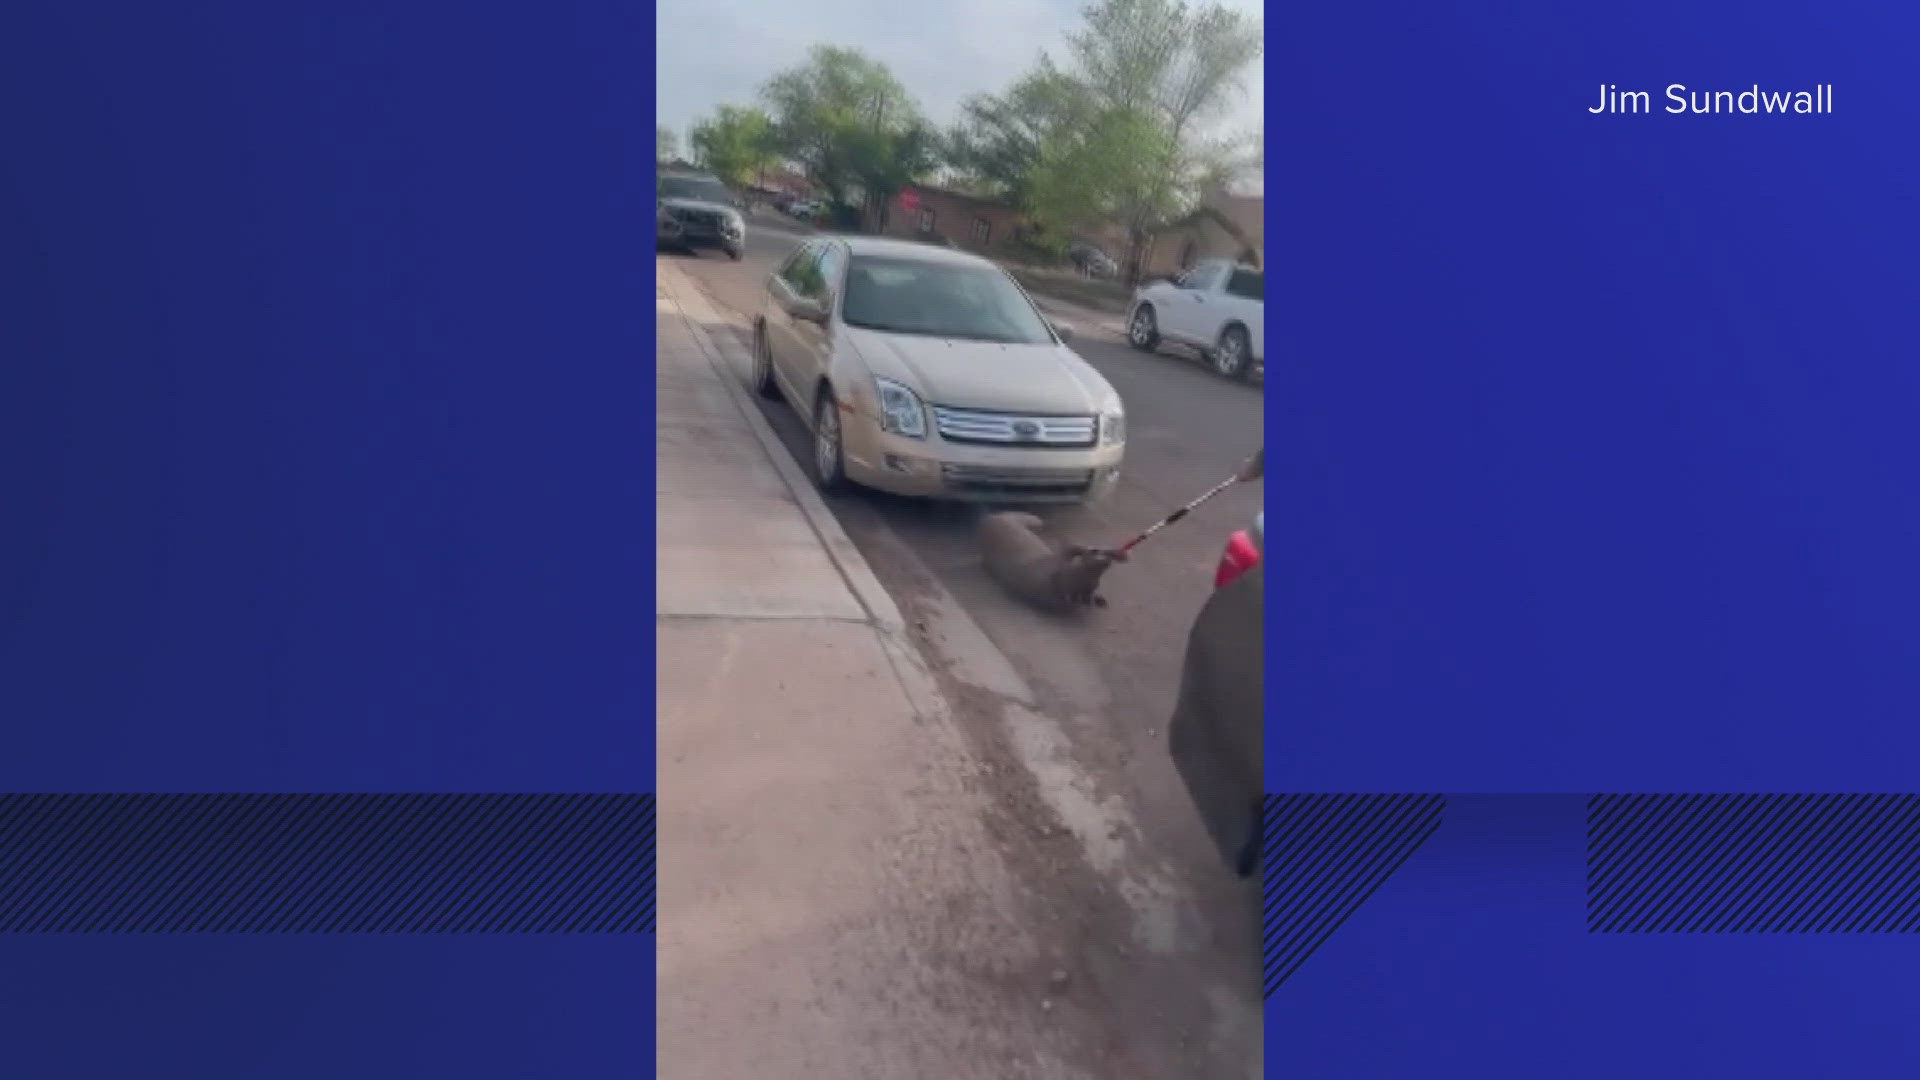 Winslow police announced Tuesday they're reviewing an allegation of animal abuse made against a local animal control officer.